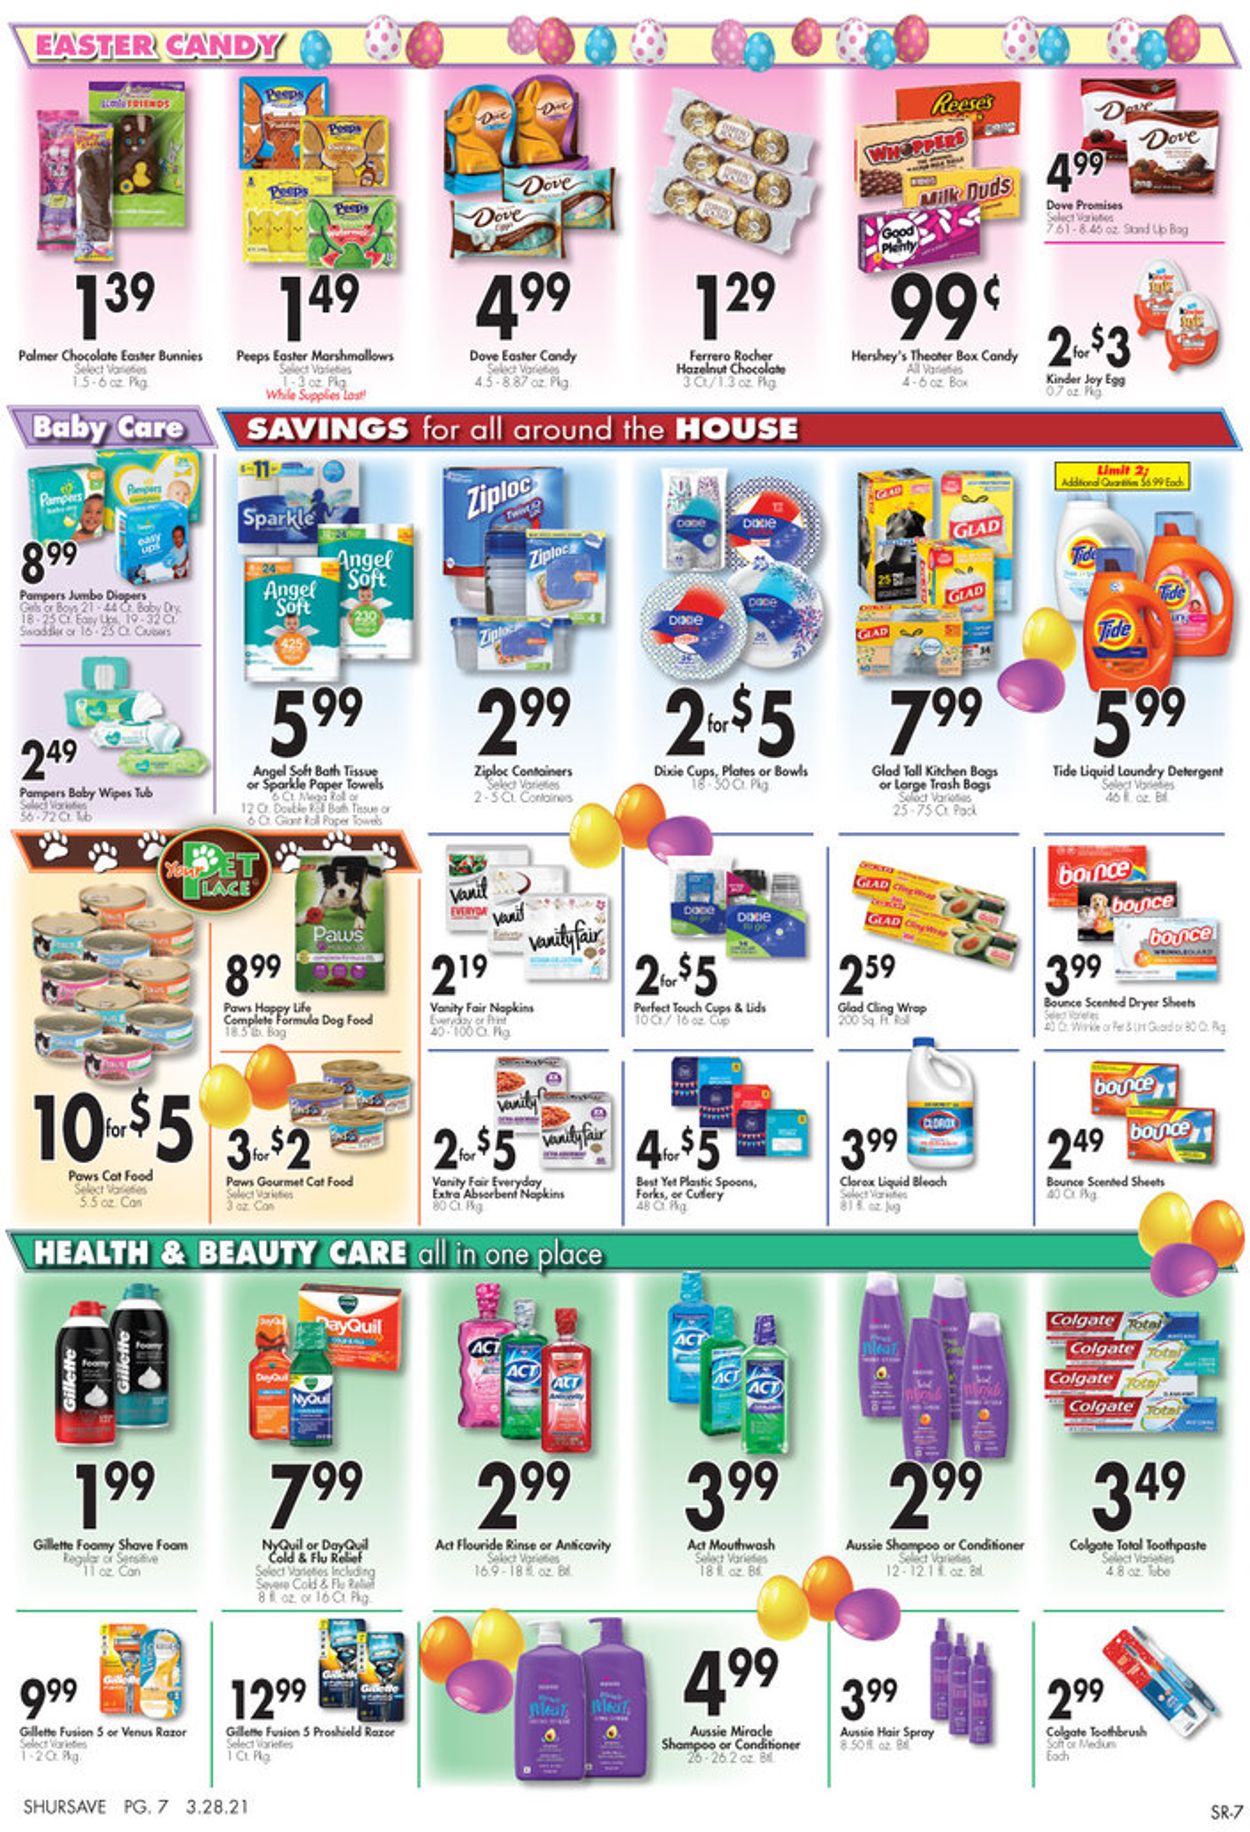 Gerrity's Supermarkets - Easter 2021 ad Weekly Ad Circular - valid 03/28-04/03/2021 (Page 8)